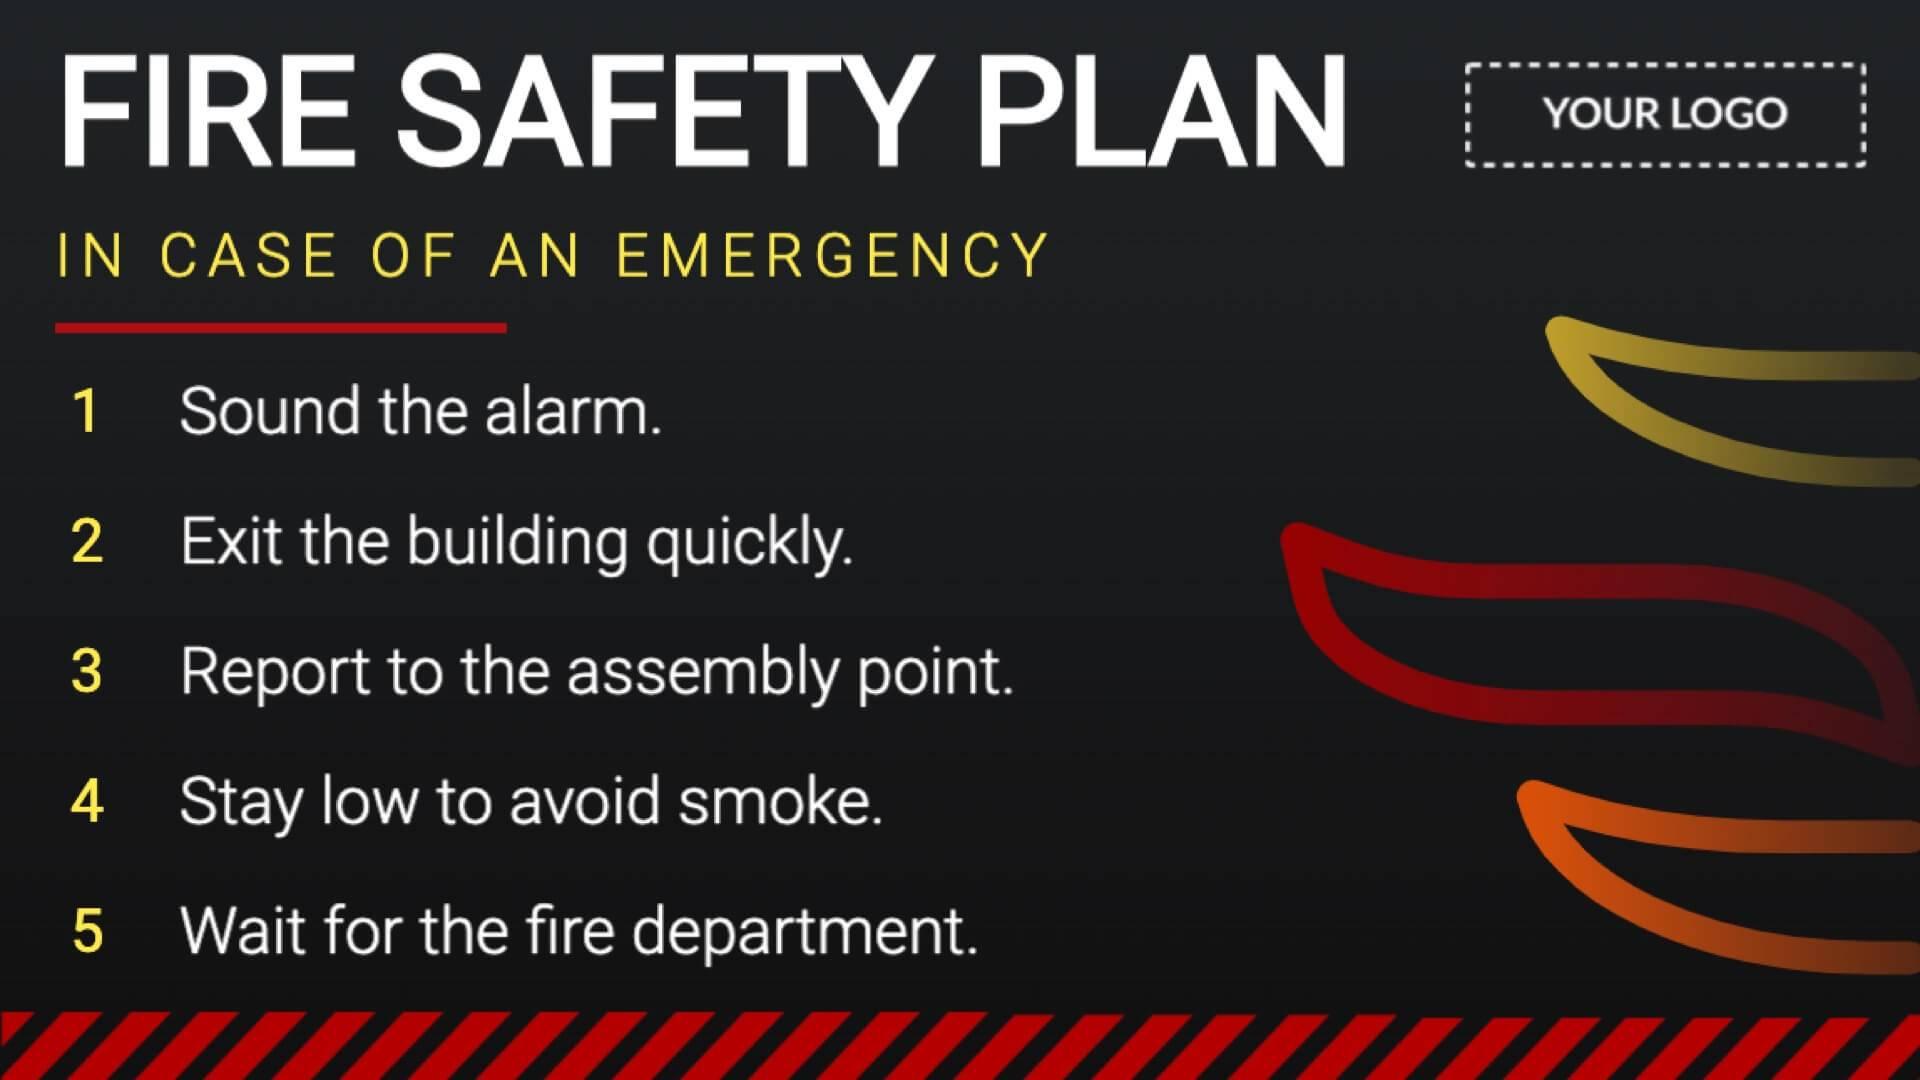 Campaign Fire Safety Digital Signage Template